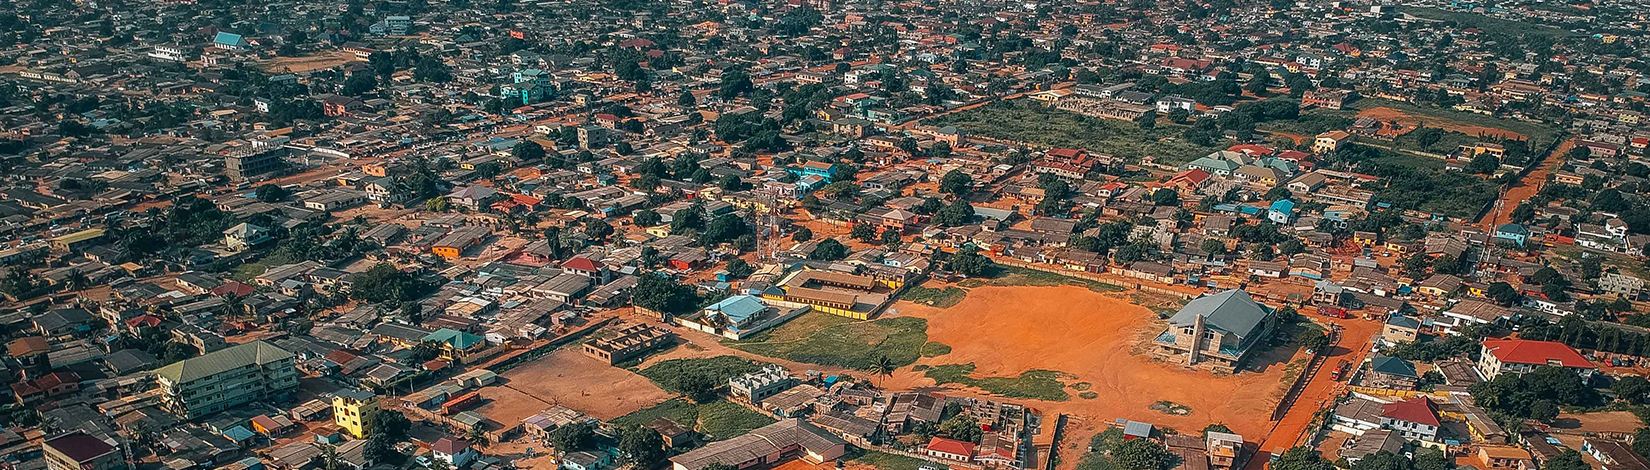 A ariel view of Ghana's capital city, Accra.